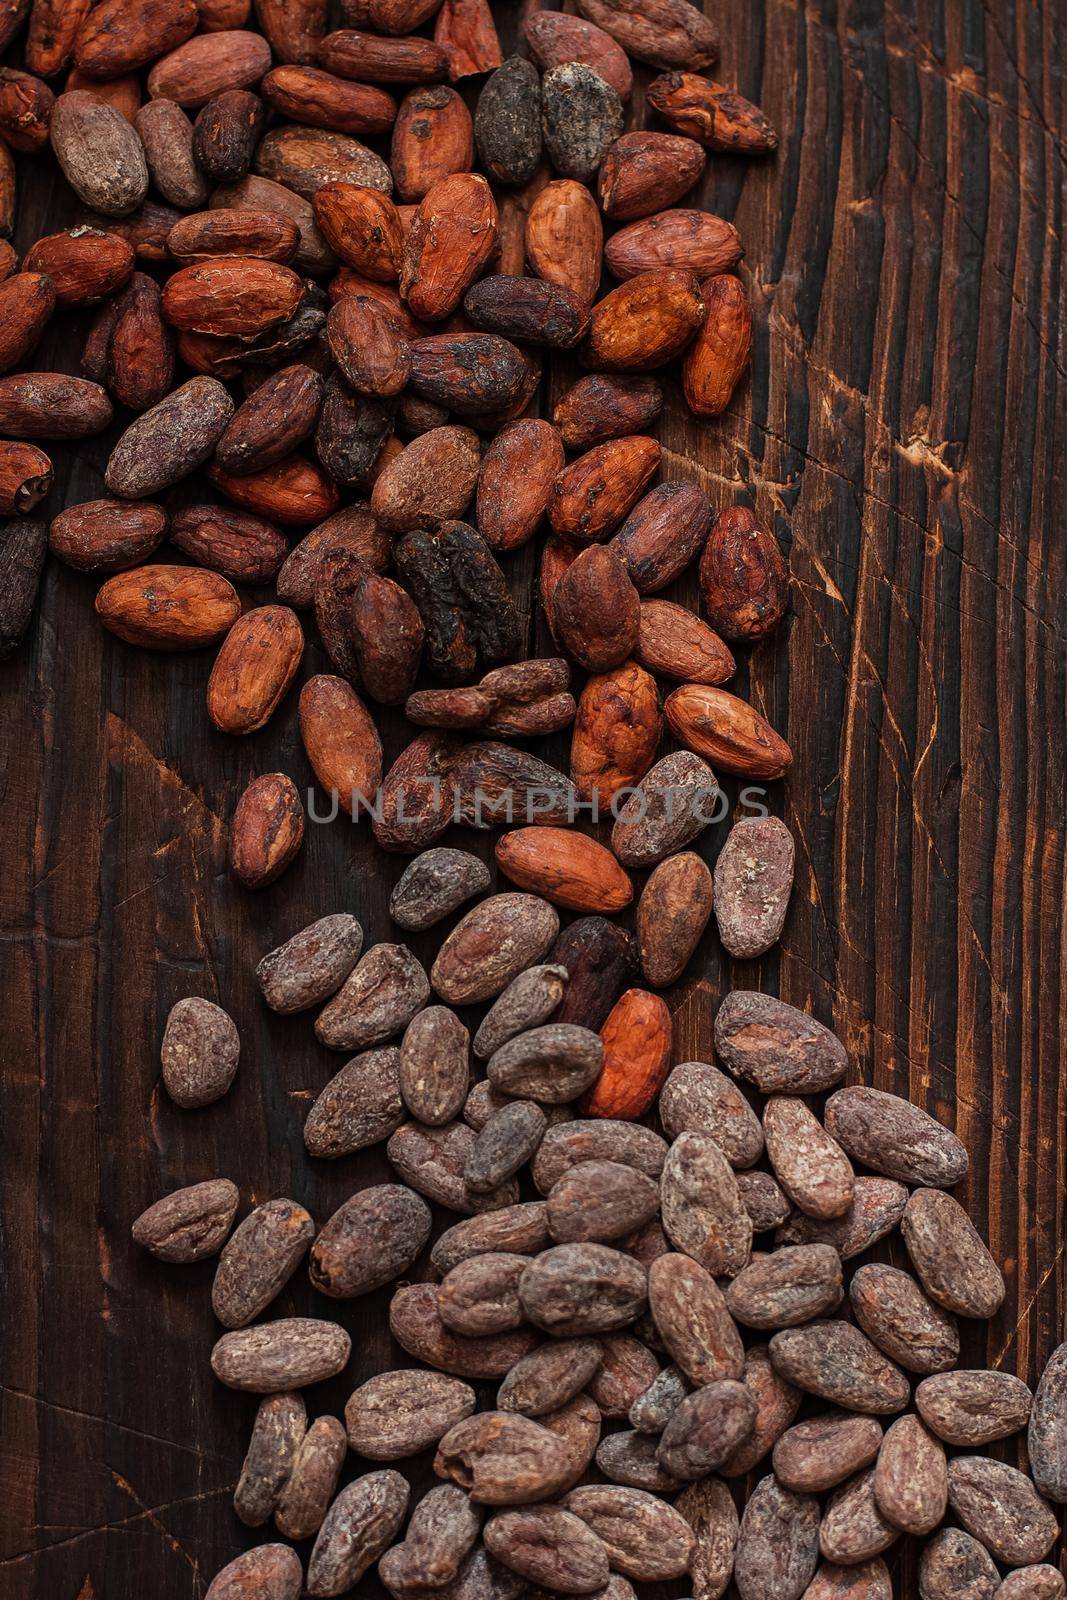 Raw cocoa beans two types Venezuela on brown background.